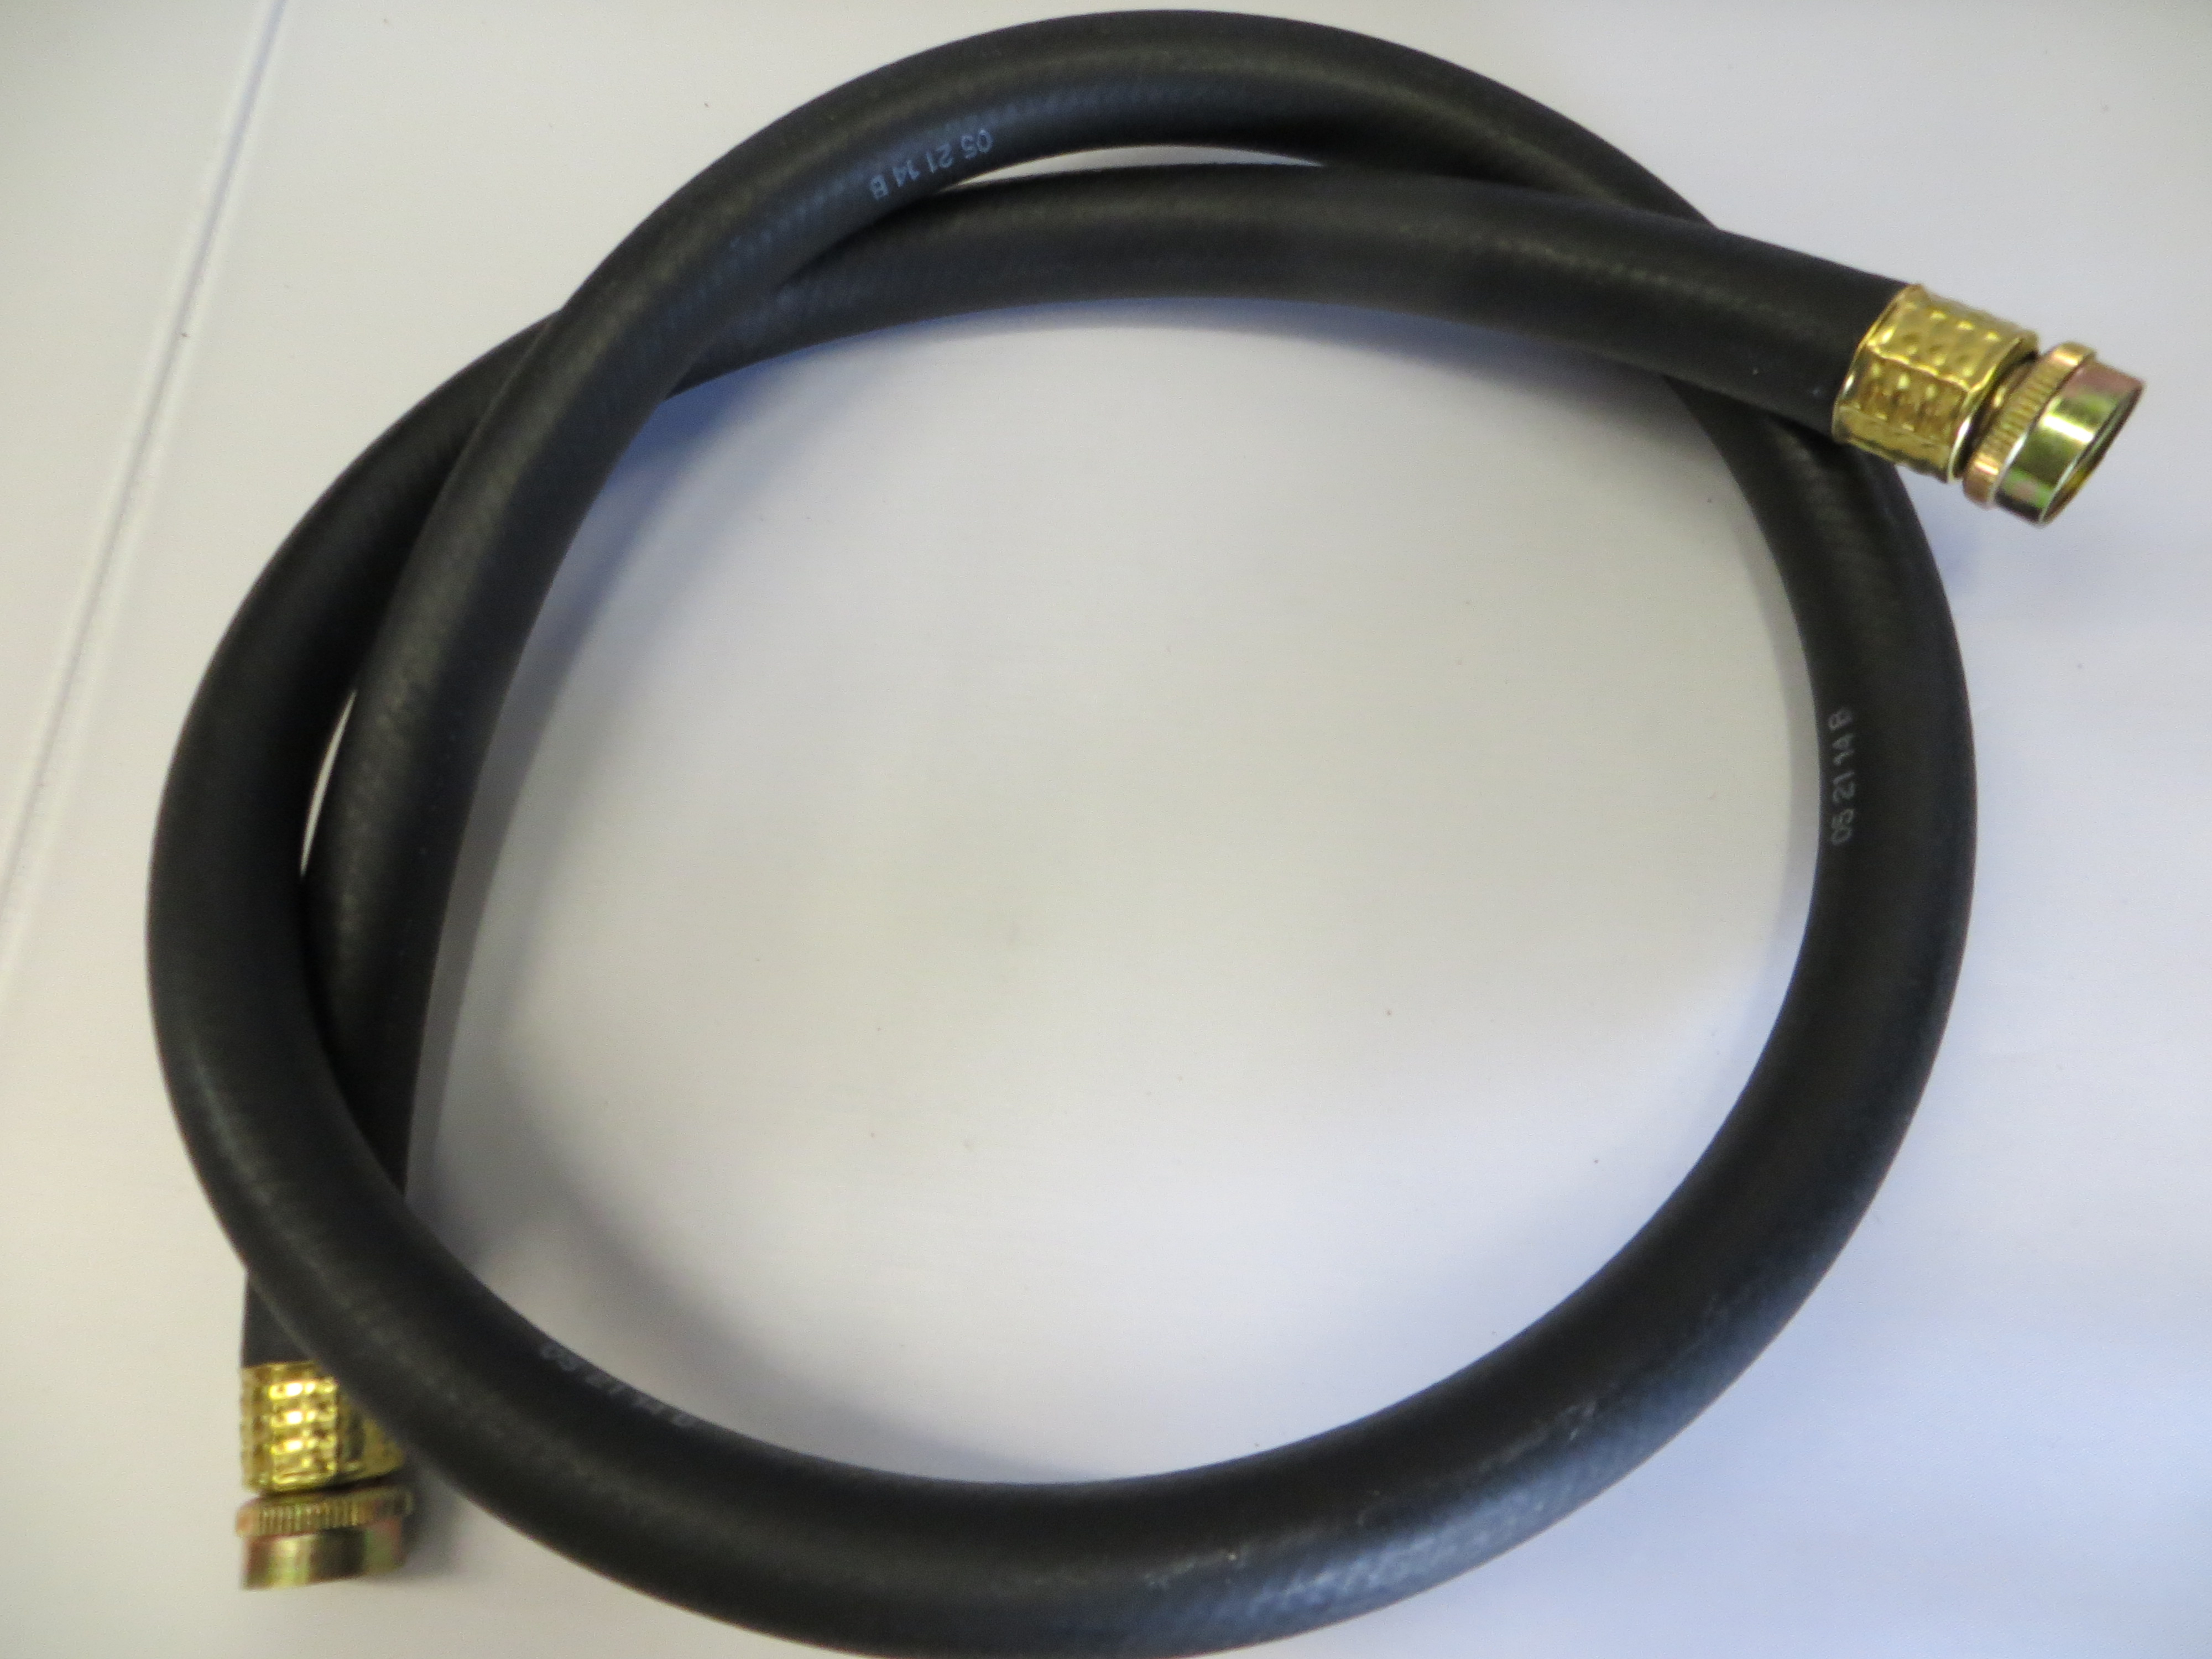 NEW Washer HOSE WTR 3/4X60 FXF CPLG NPT for IPSO F200164 